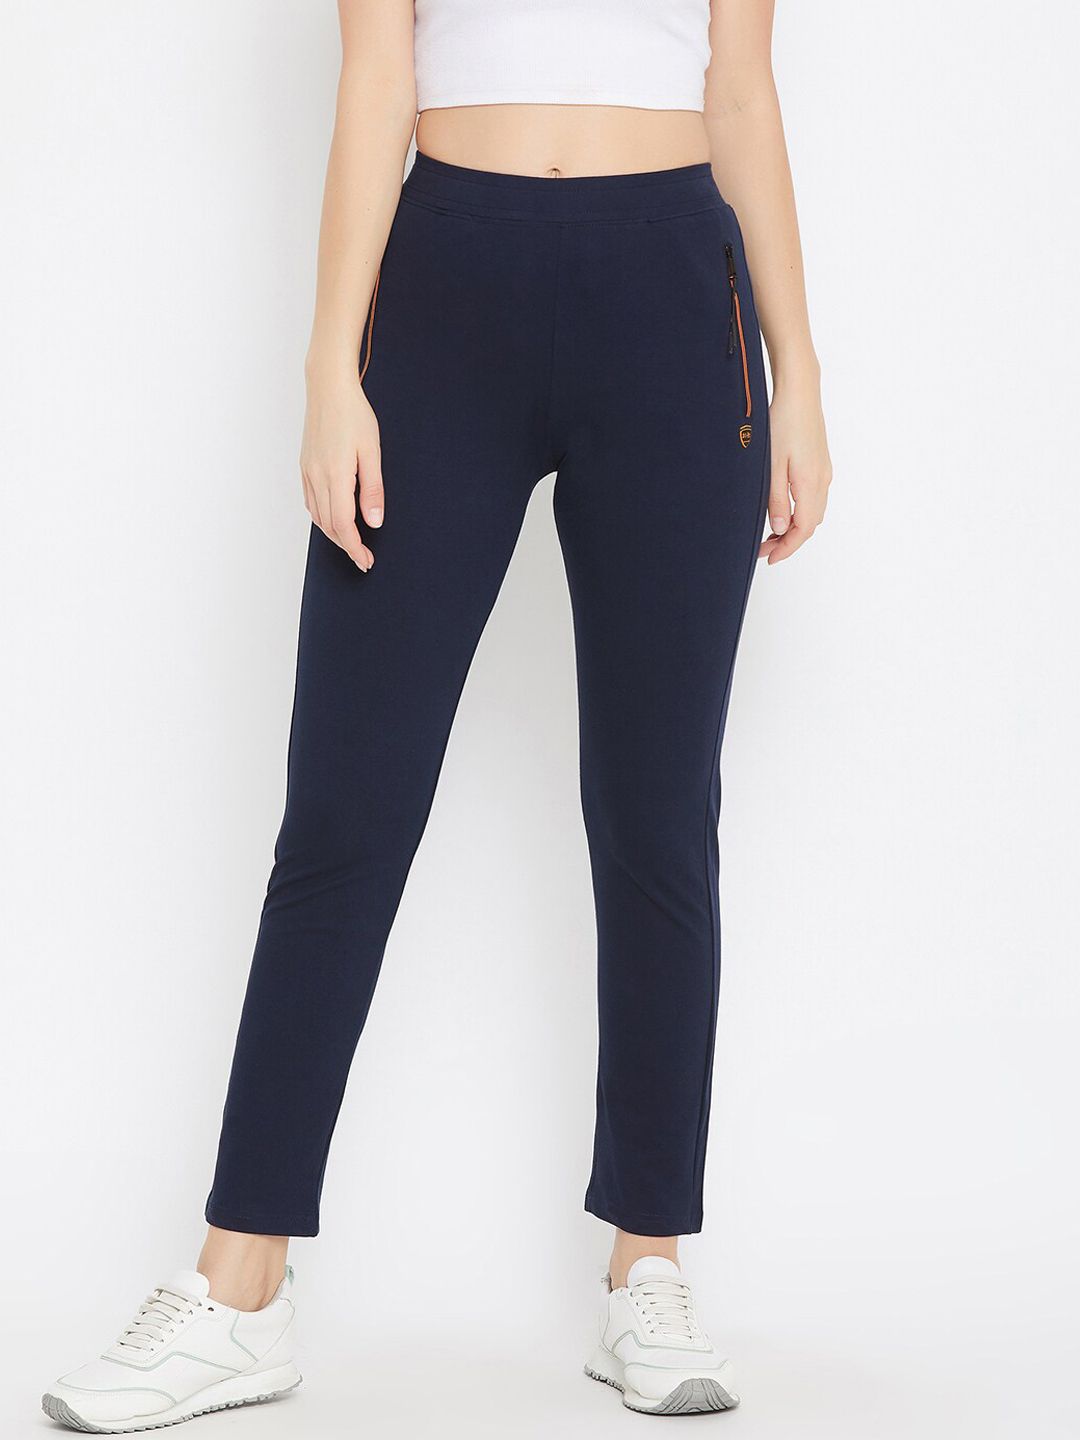 Okane Women Navy Blue Solid Track Pants Price in India